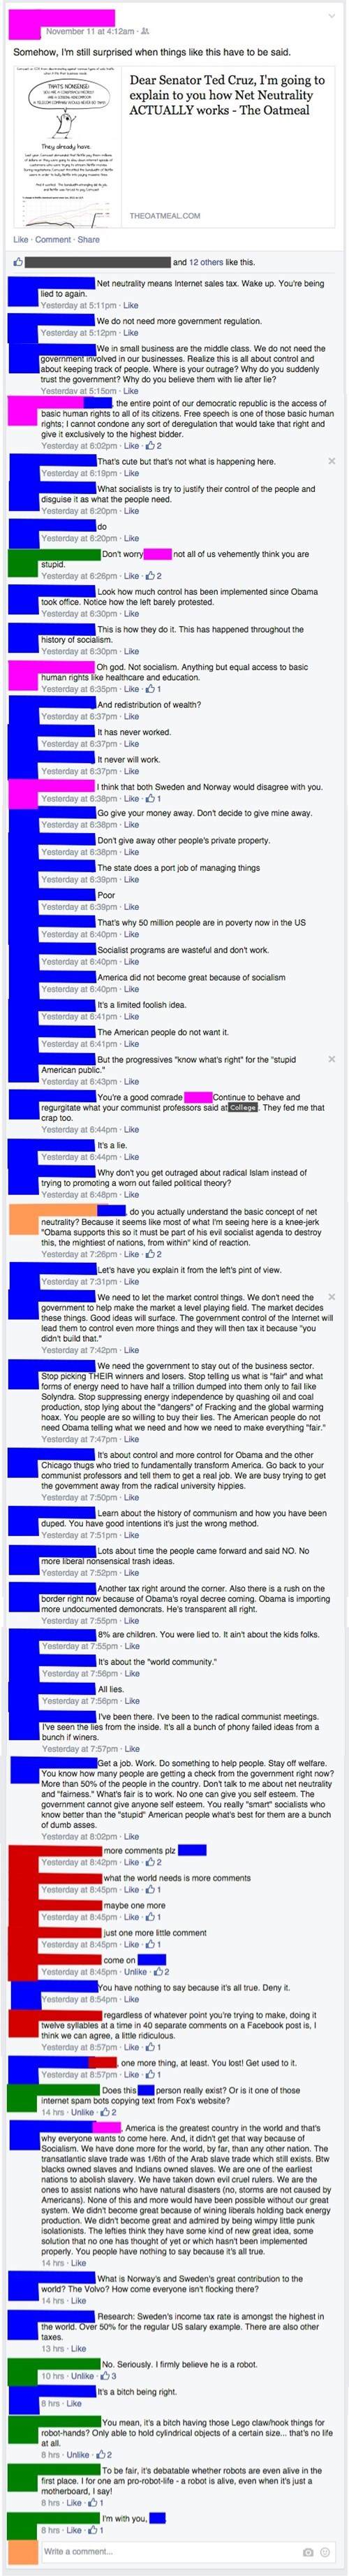 A Really Long, Drawn-Out Political Conversation? Facebook is the Perfect Place!